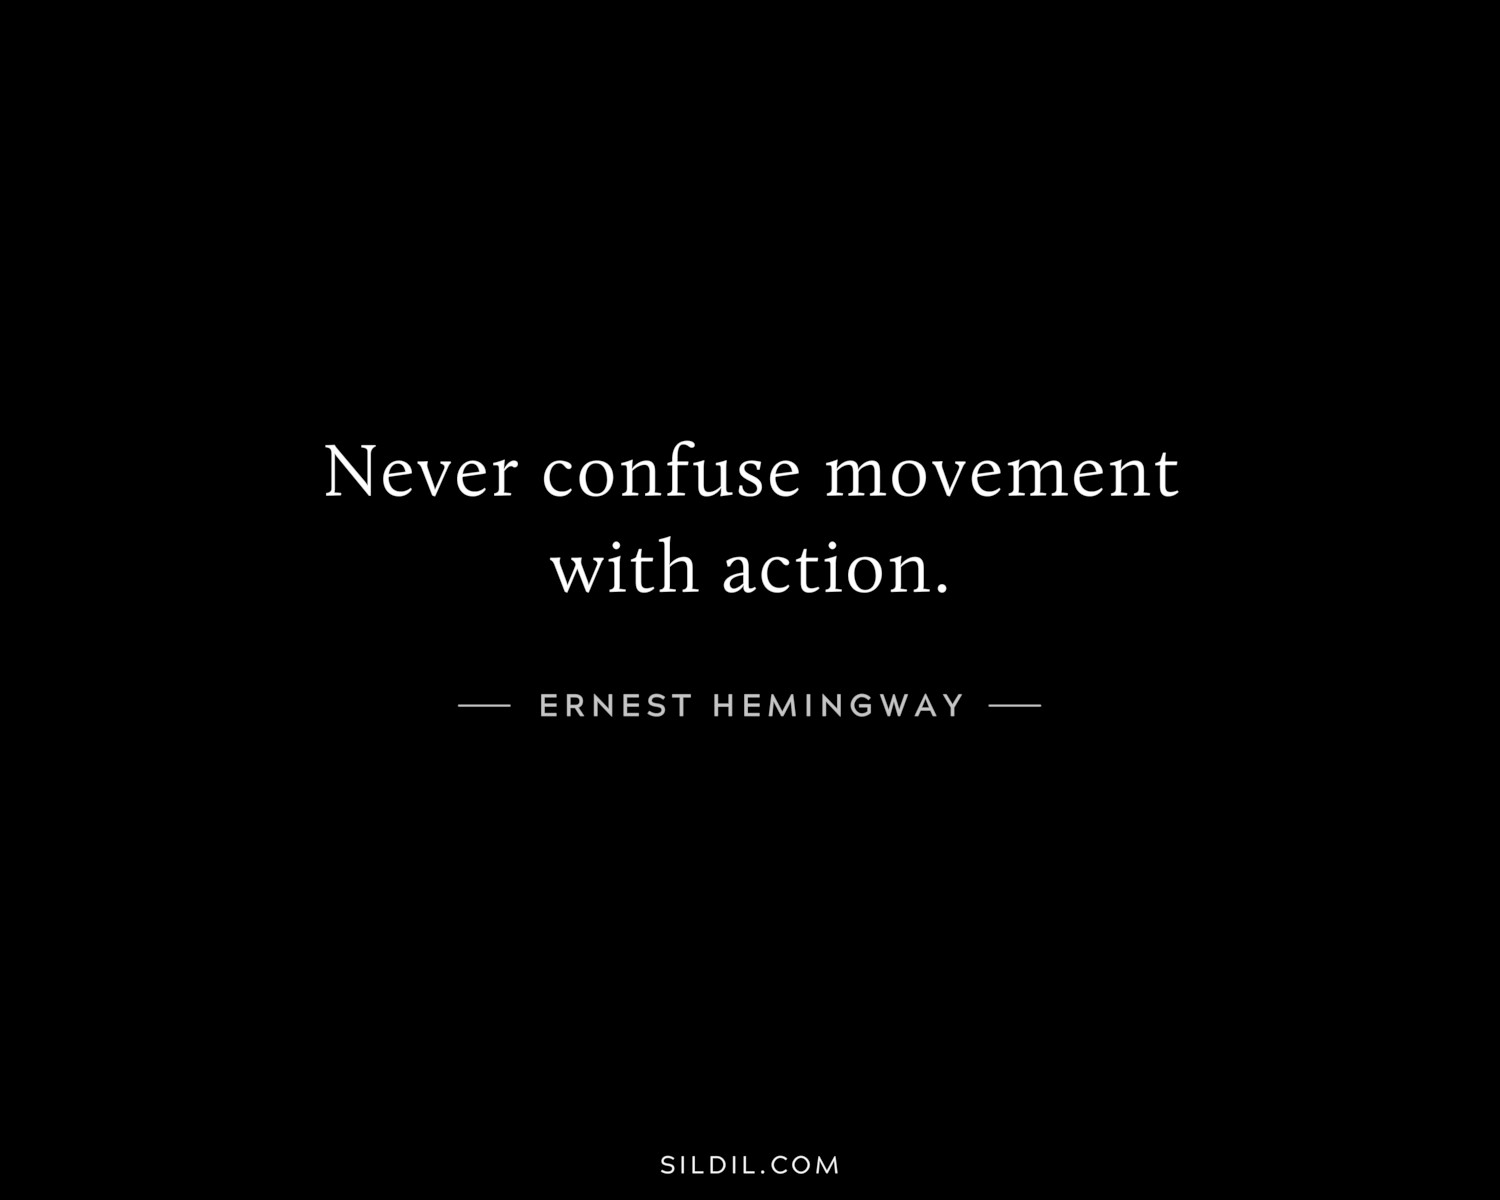 Never confuse movement with action.